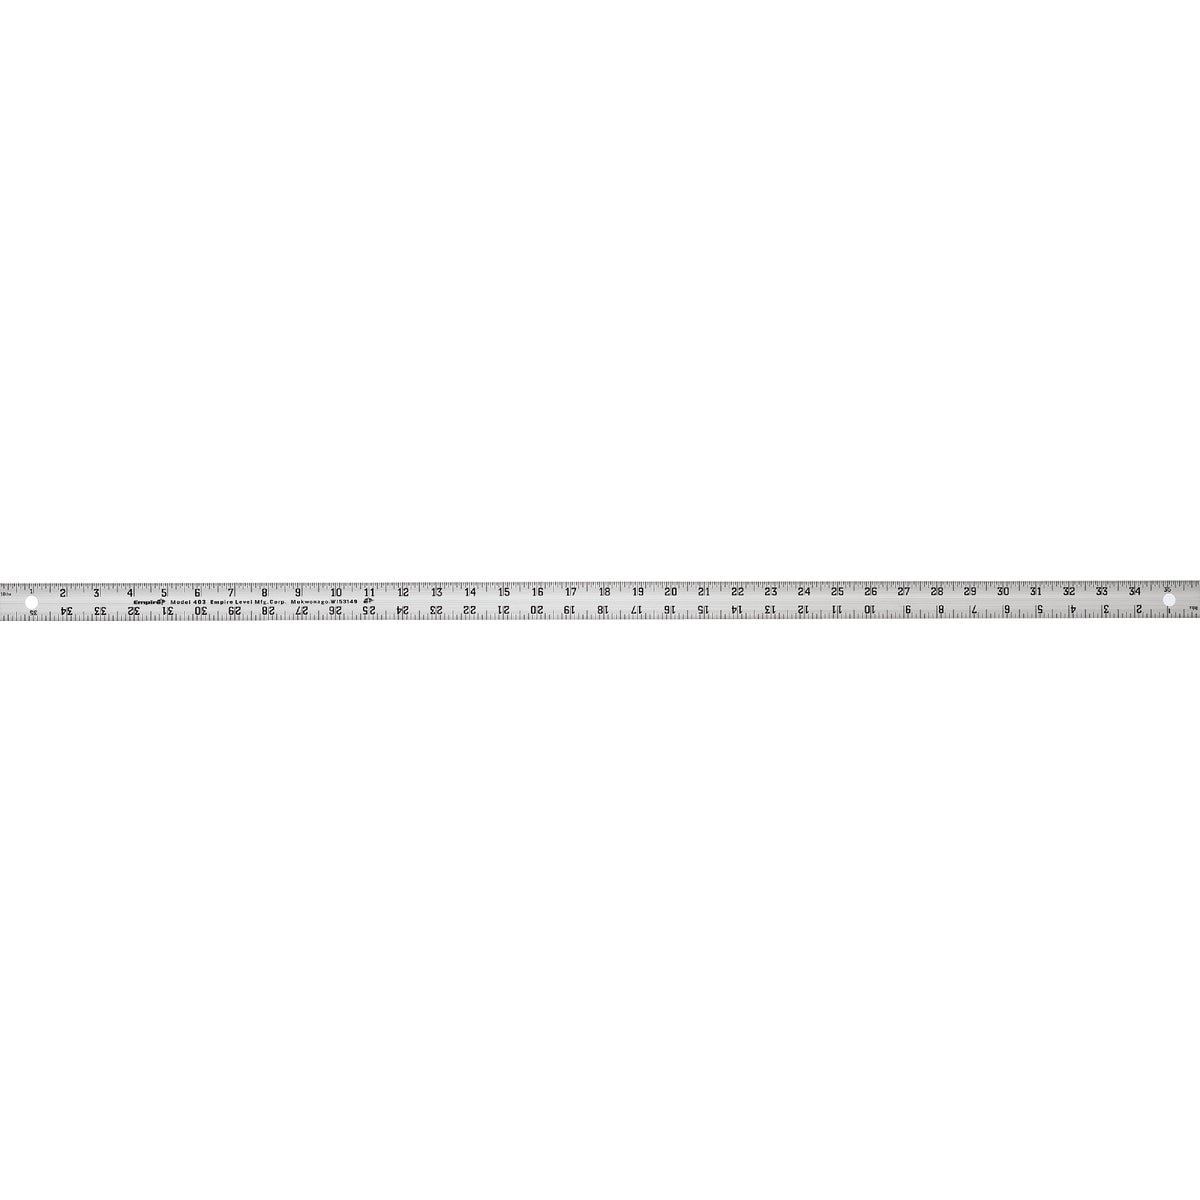 Item 303373, Aluminum straight edge with easy-to-read inch scale graduations.